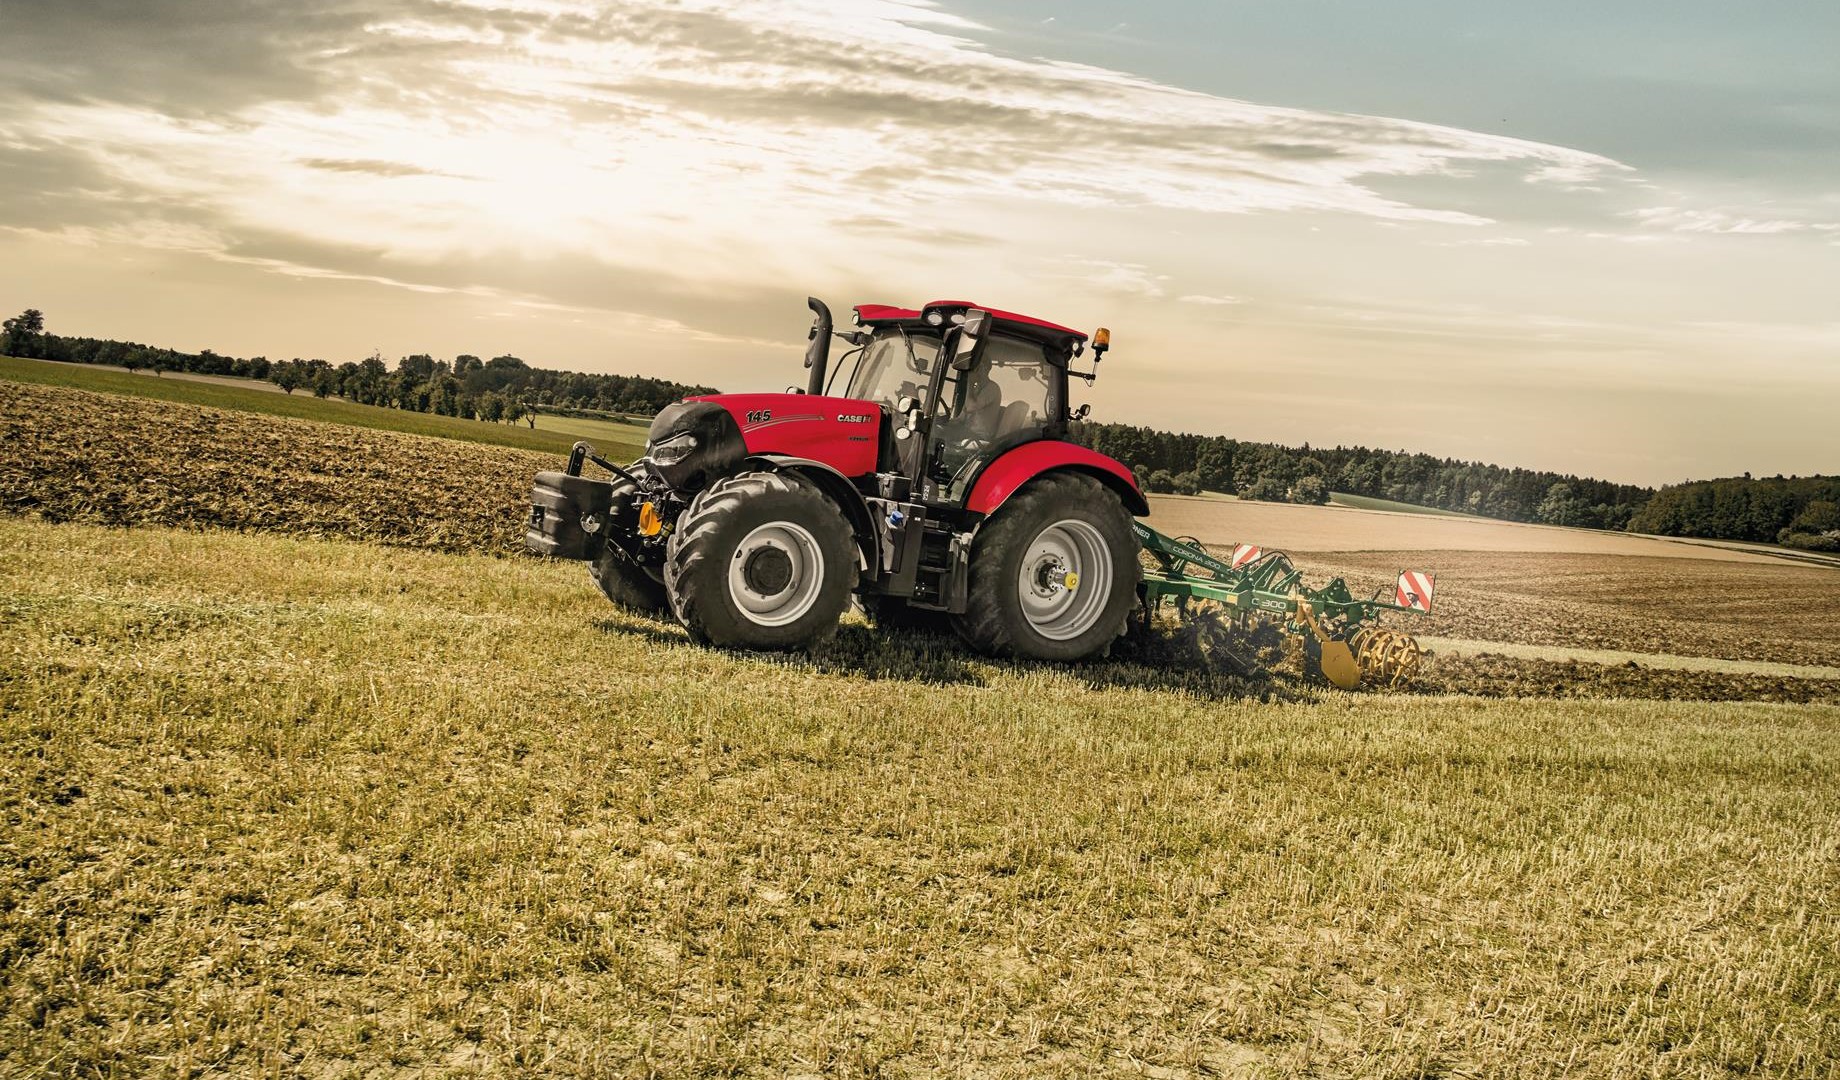 Case IH Maxxum 145 Multicontroller the world’s most fuel-efficient four-cylinder tractor for field work